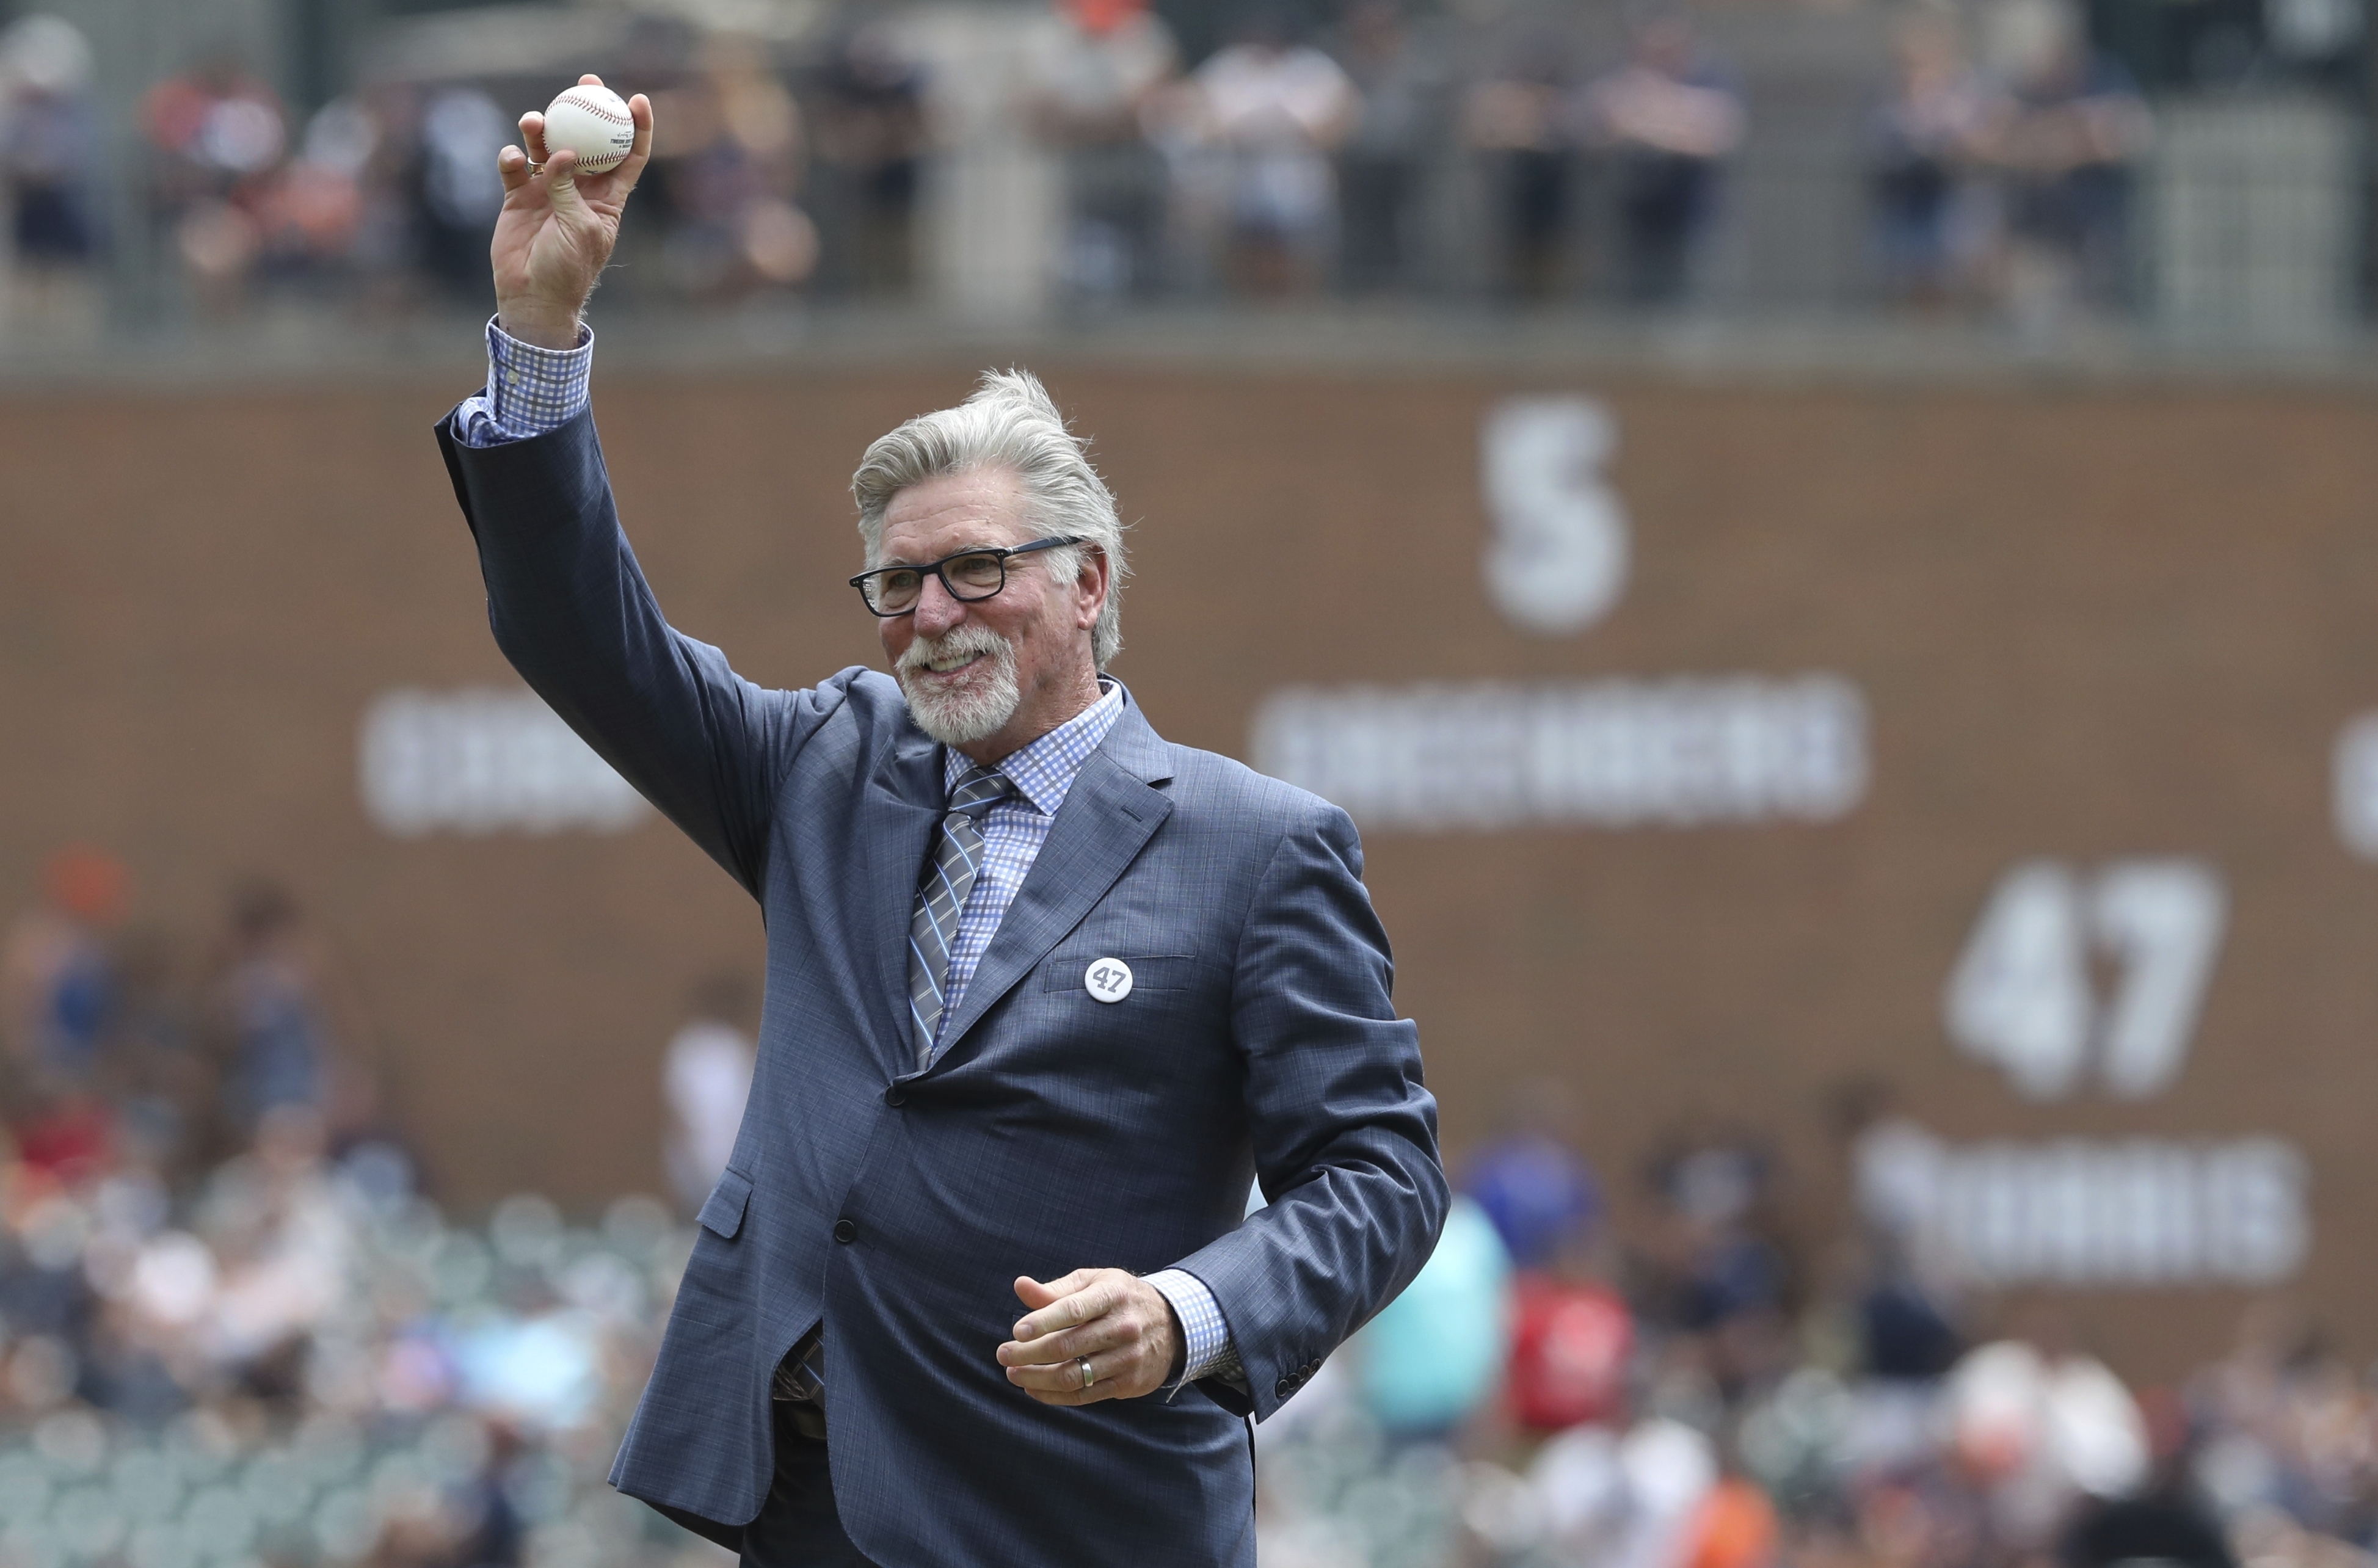 Hall of Famer Jack Morris coming to Flint in February, Sports